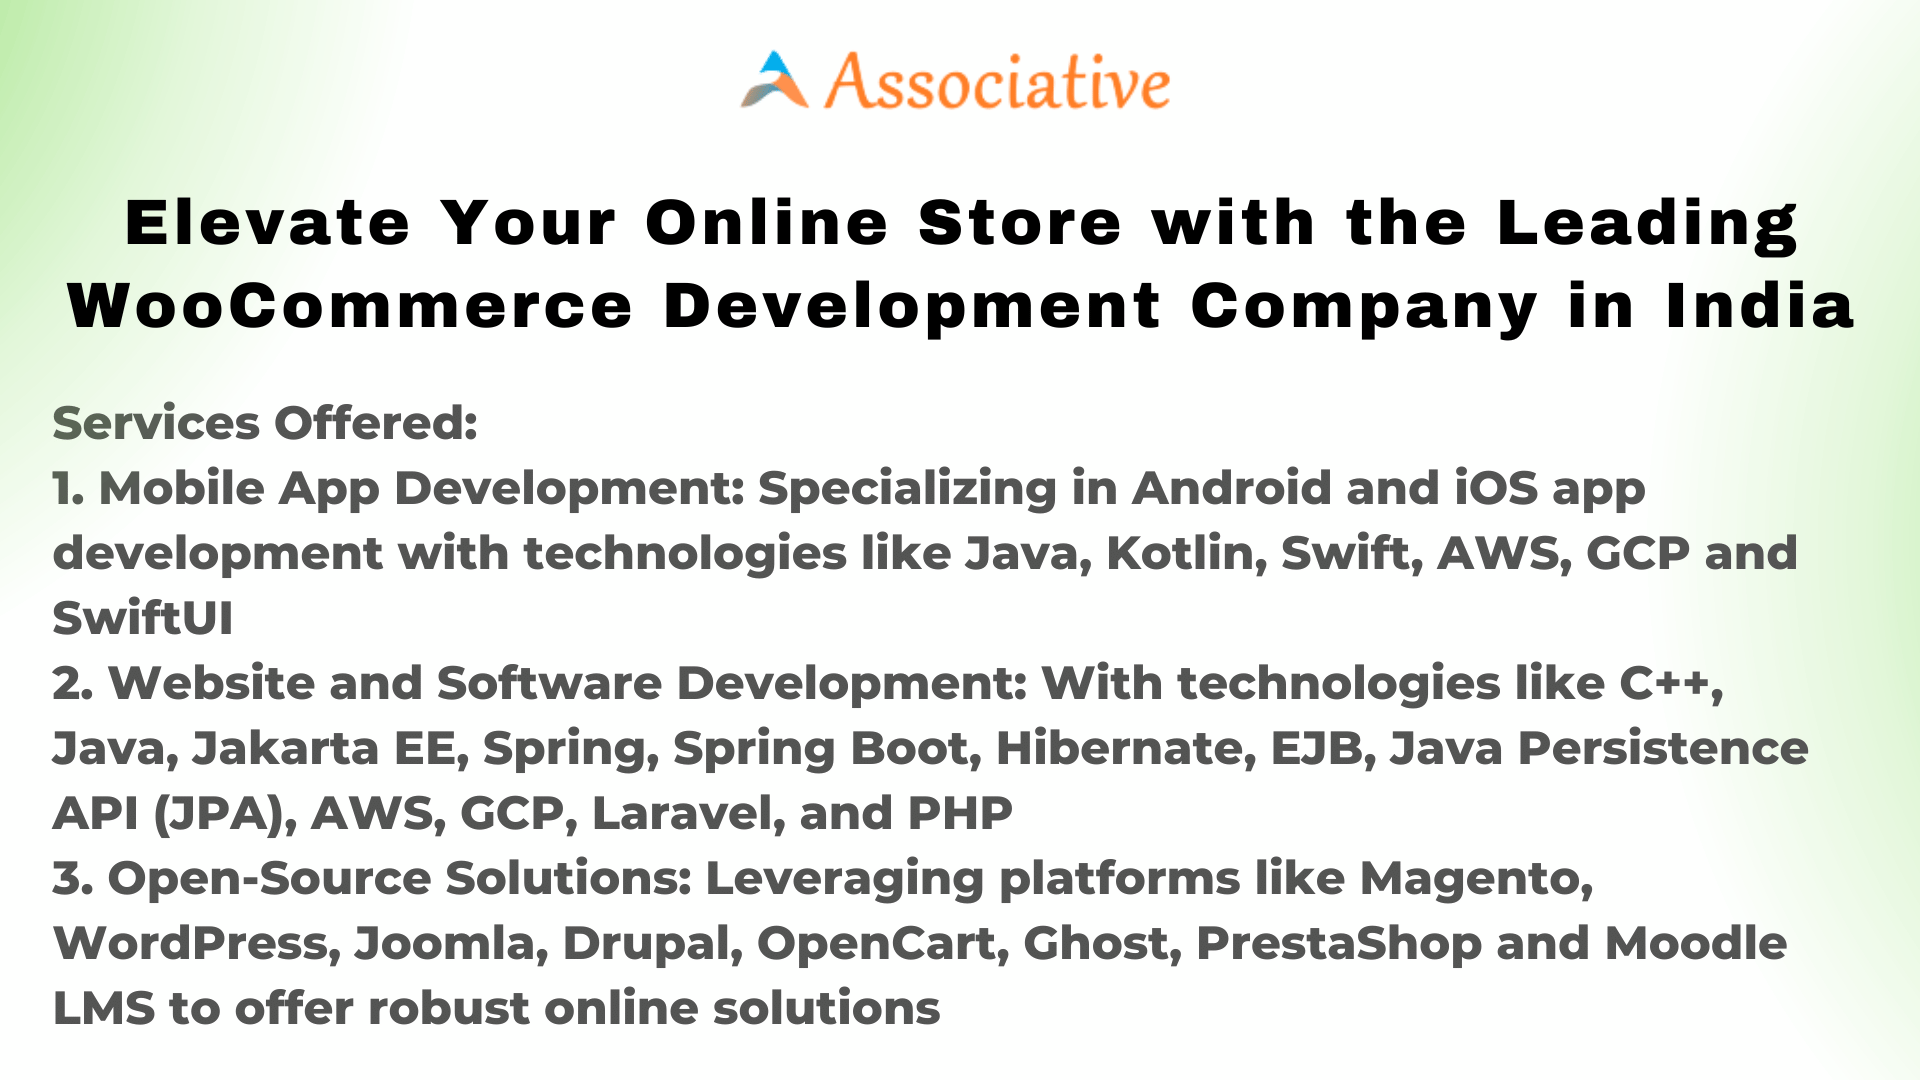 Elevate Your Online Store with the Leading WooCommerce Development Company in India